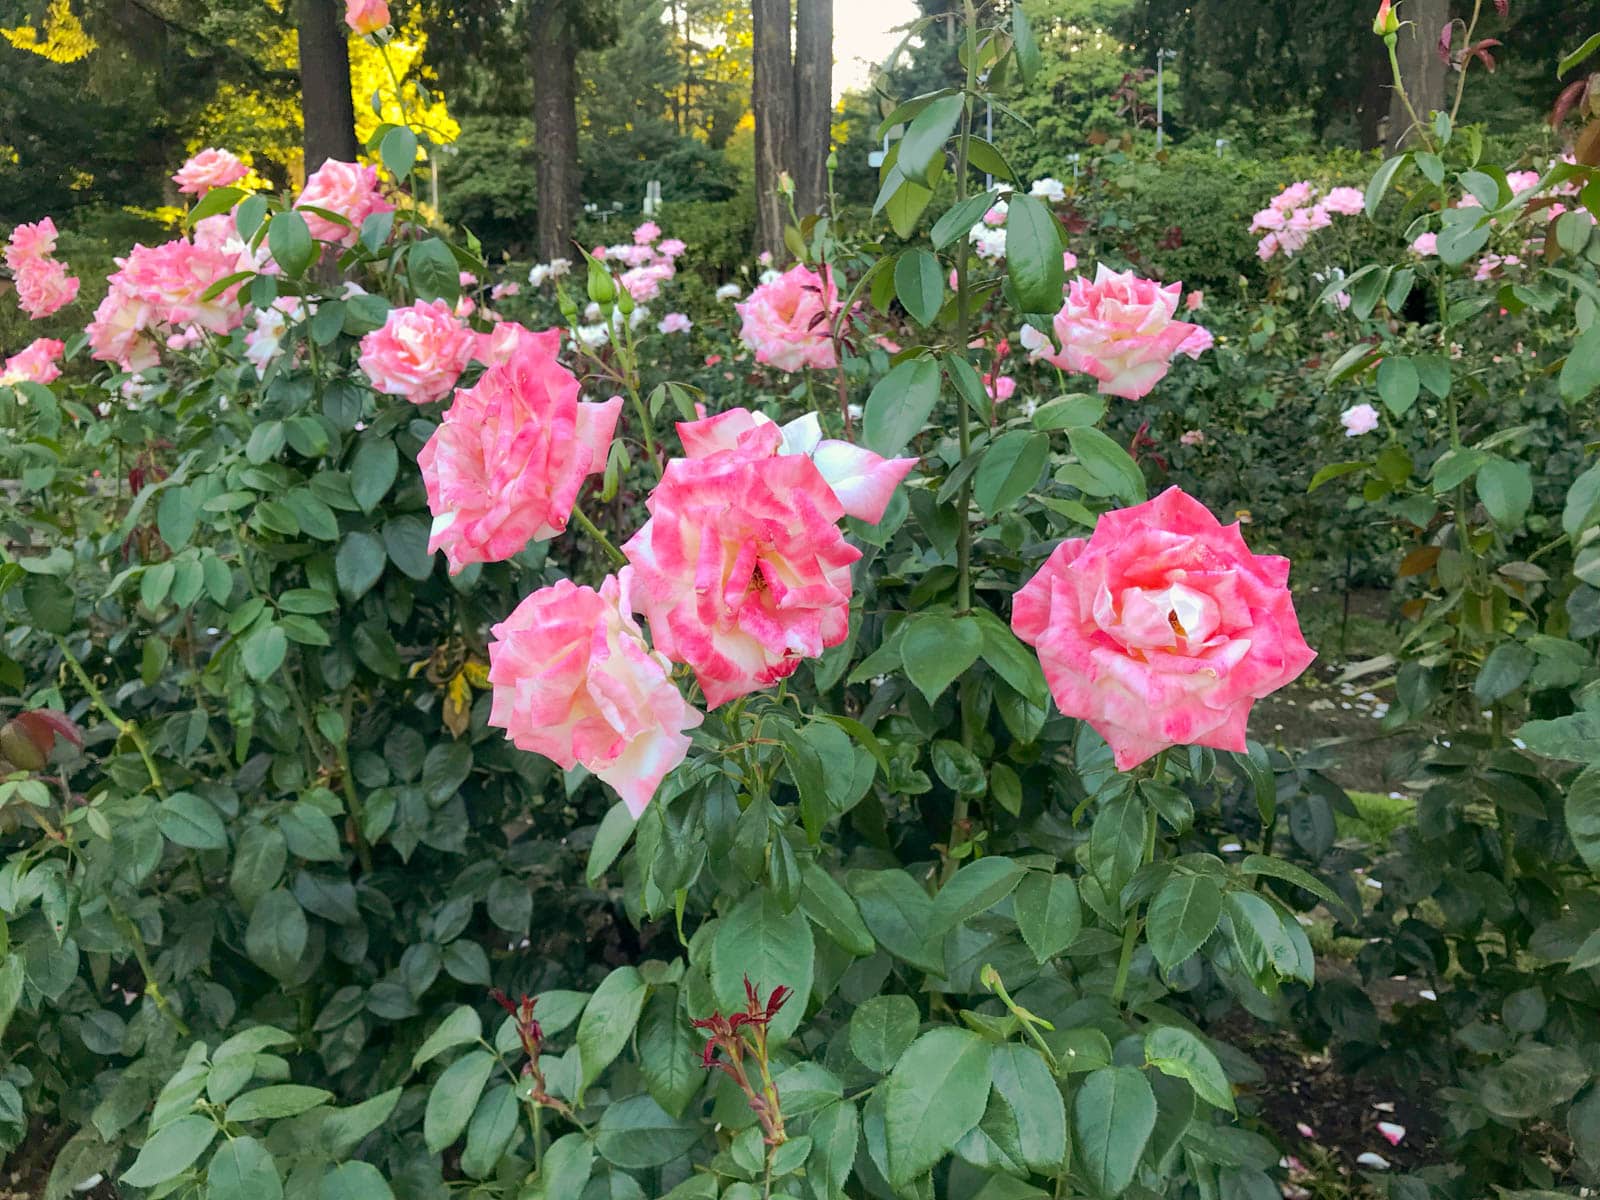 A rose bush with many bright pink roses growing, some with flecks of white.